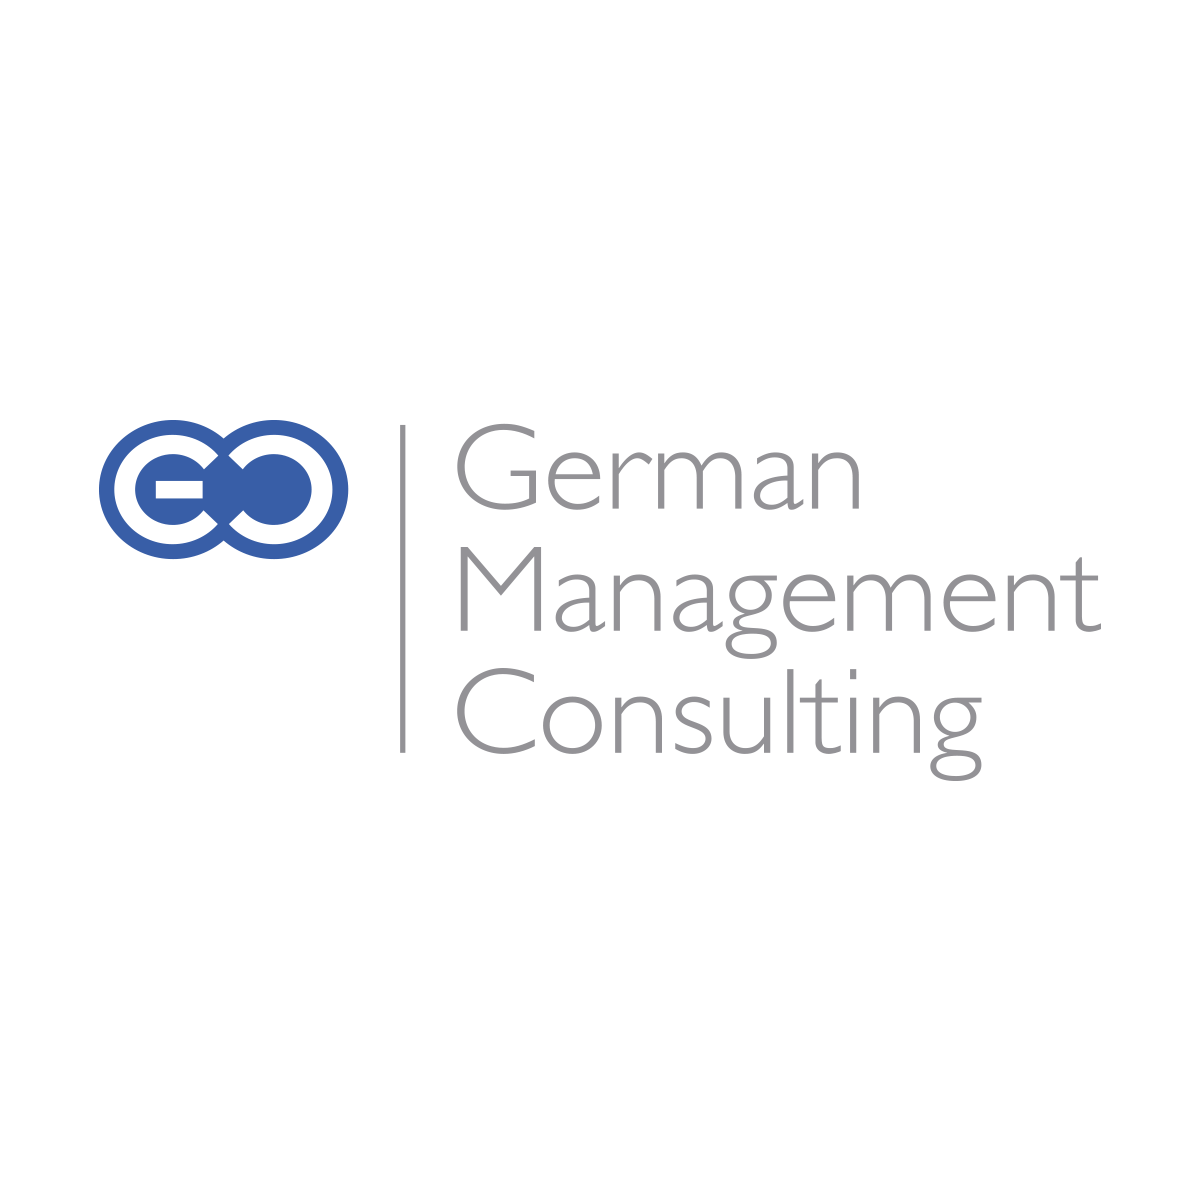 German Management Consulting